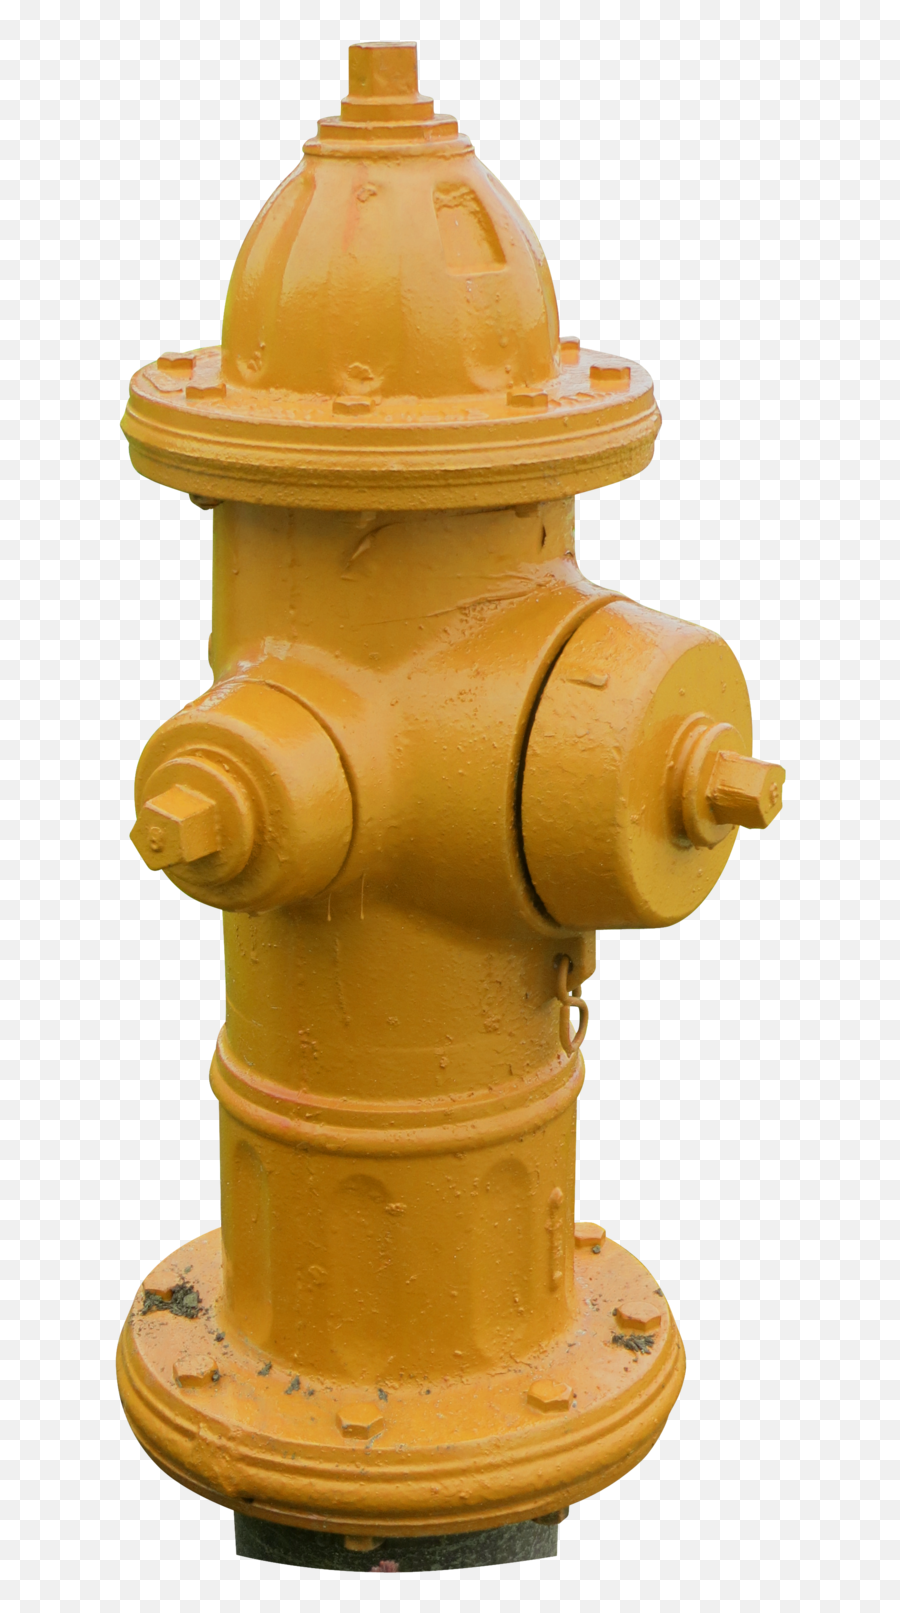 49 Fire Hydrants Png Images For Free - Yellow Fire Hydrant White Background Emoji,Fire Hydreant Emoji